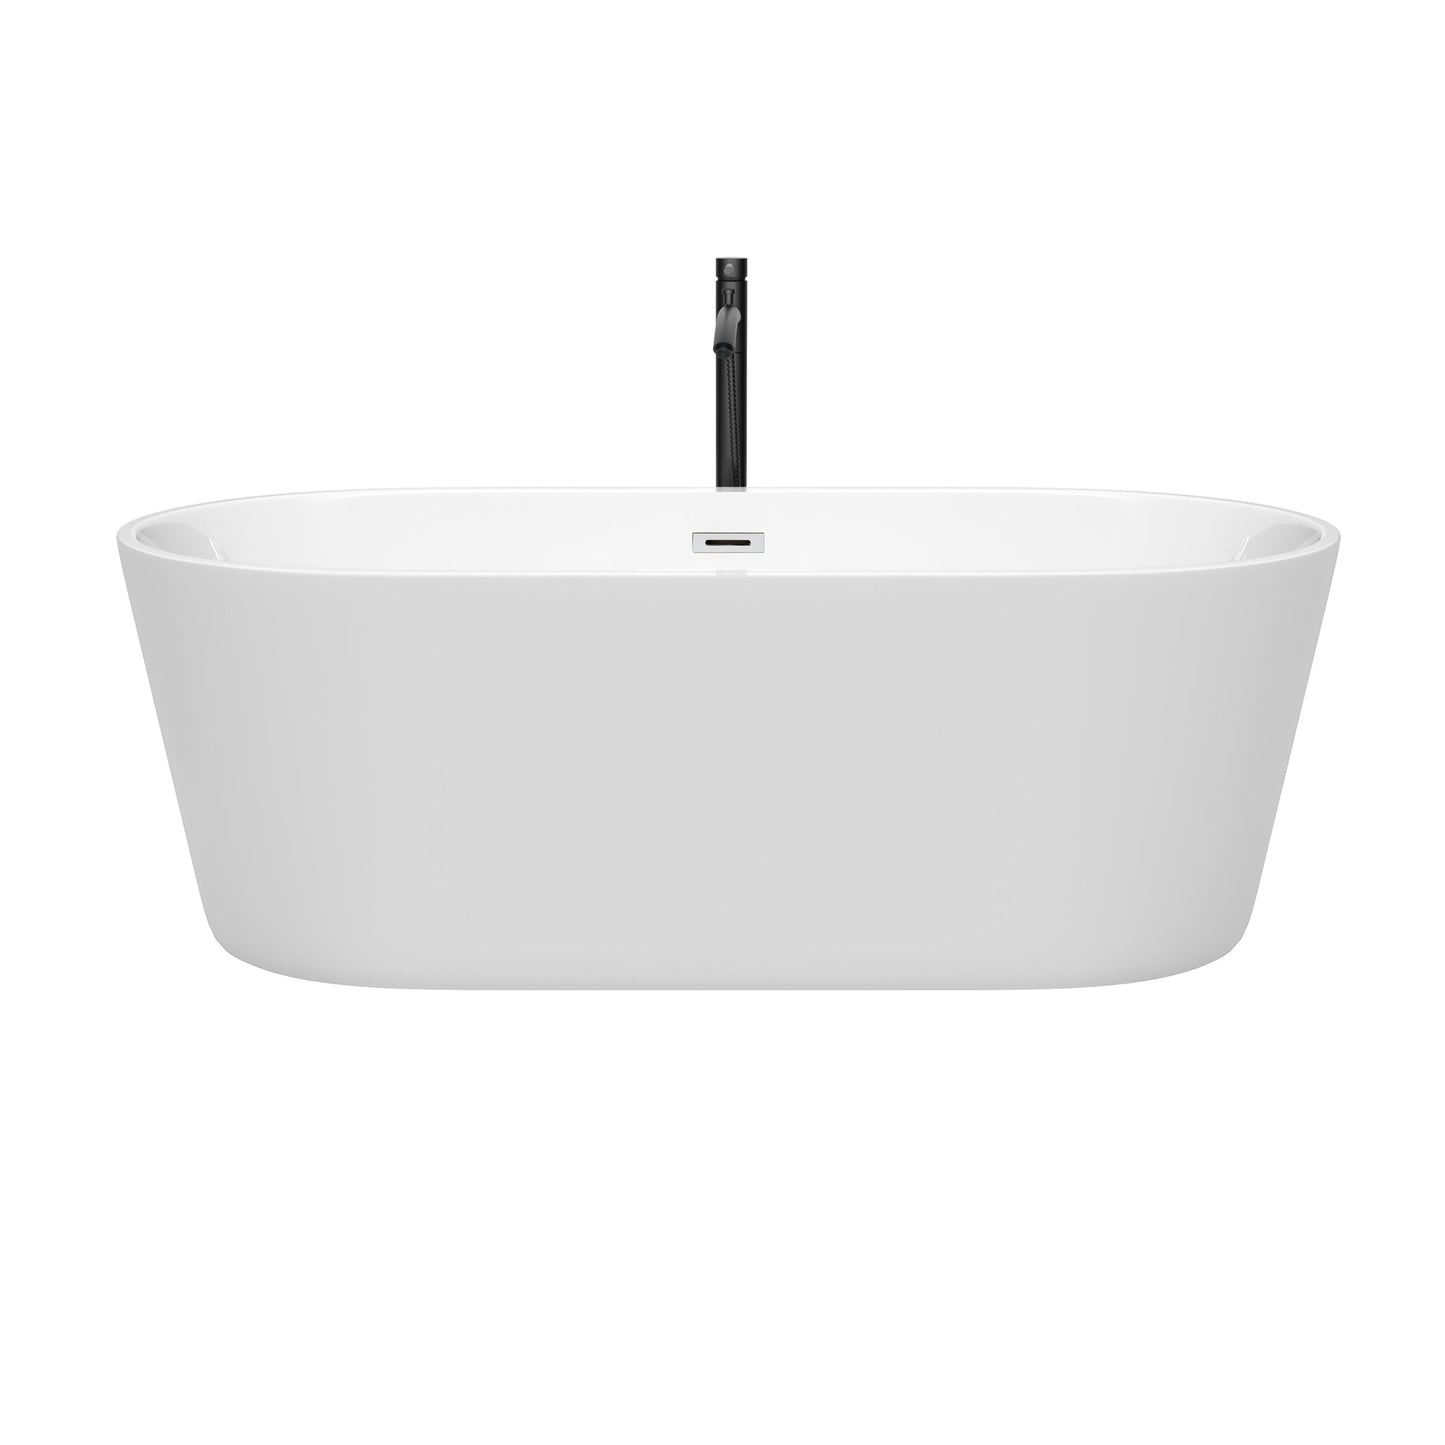 Wyndham Collection Carissa 67" Freestanding Bathtub in White With Polished Chrome Trim and Floor Mounted Faucet in Matte Black